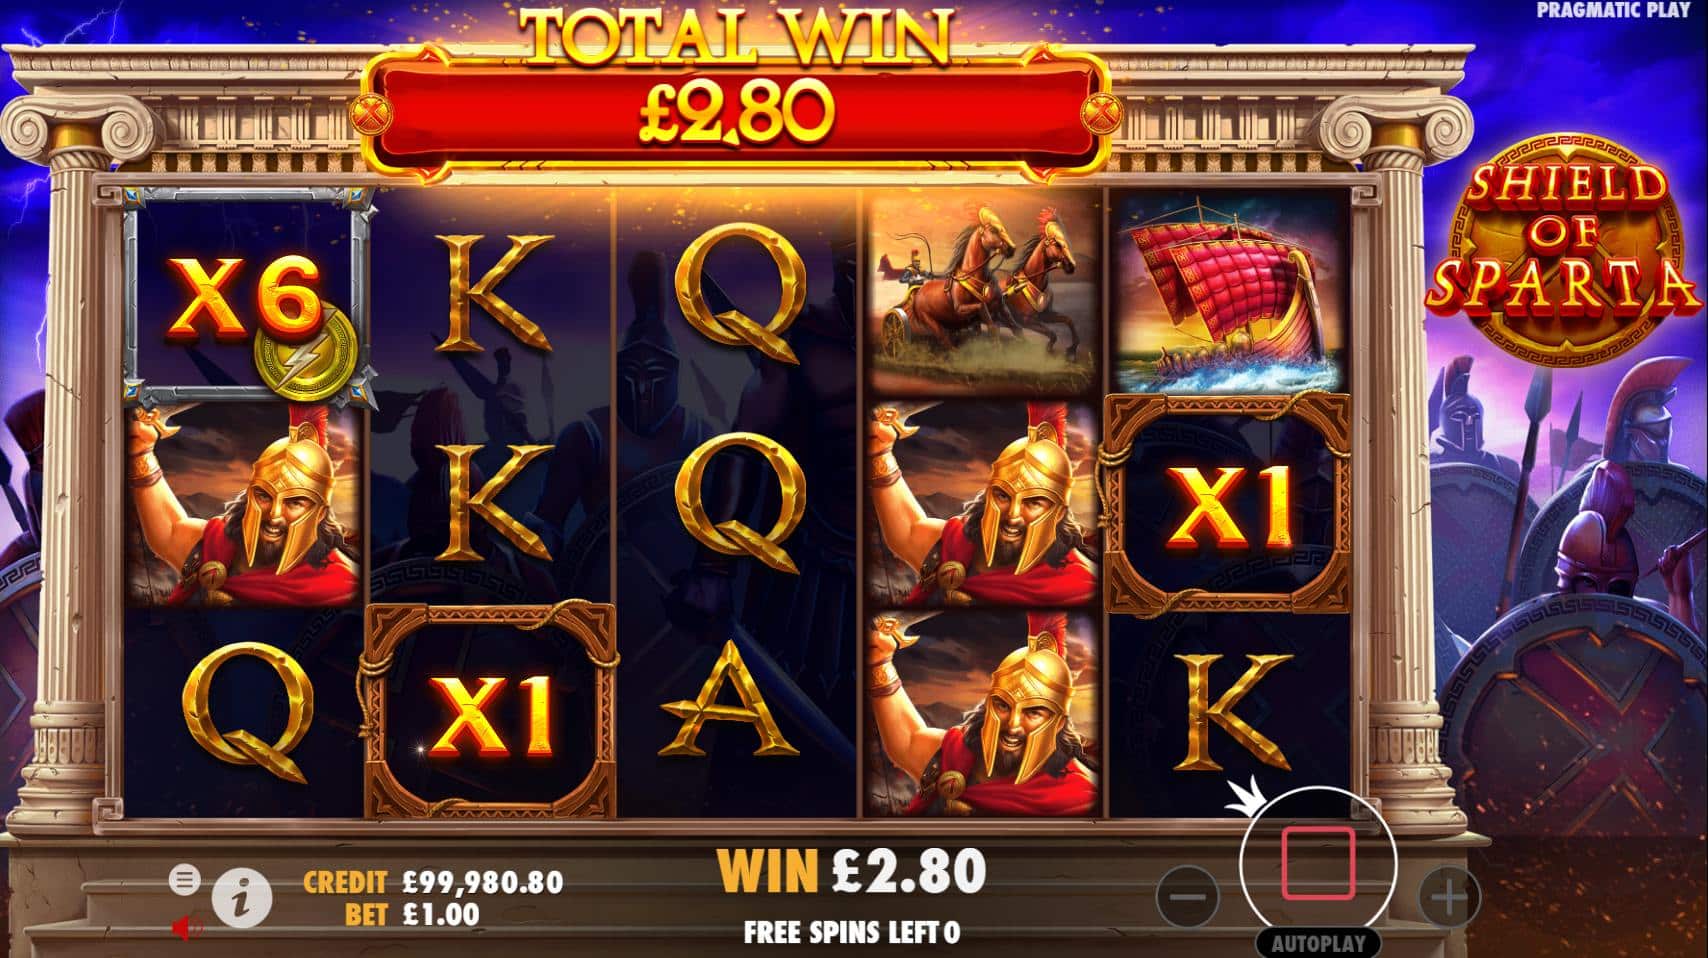 Shield of Sparta Free Spins